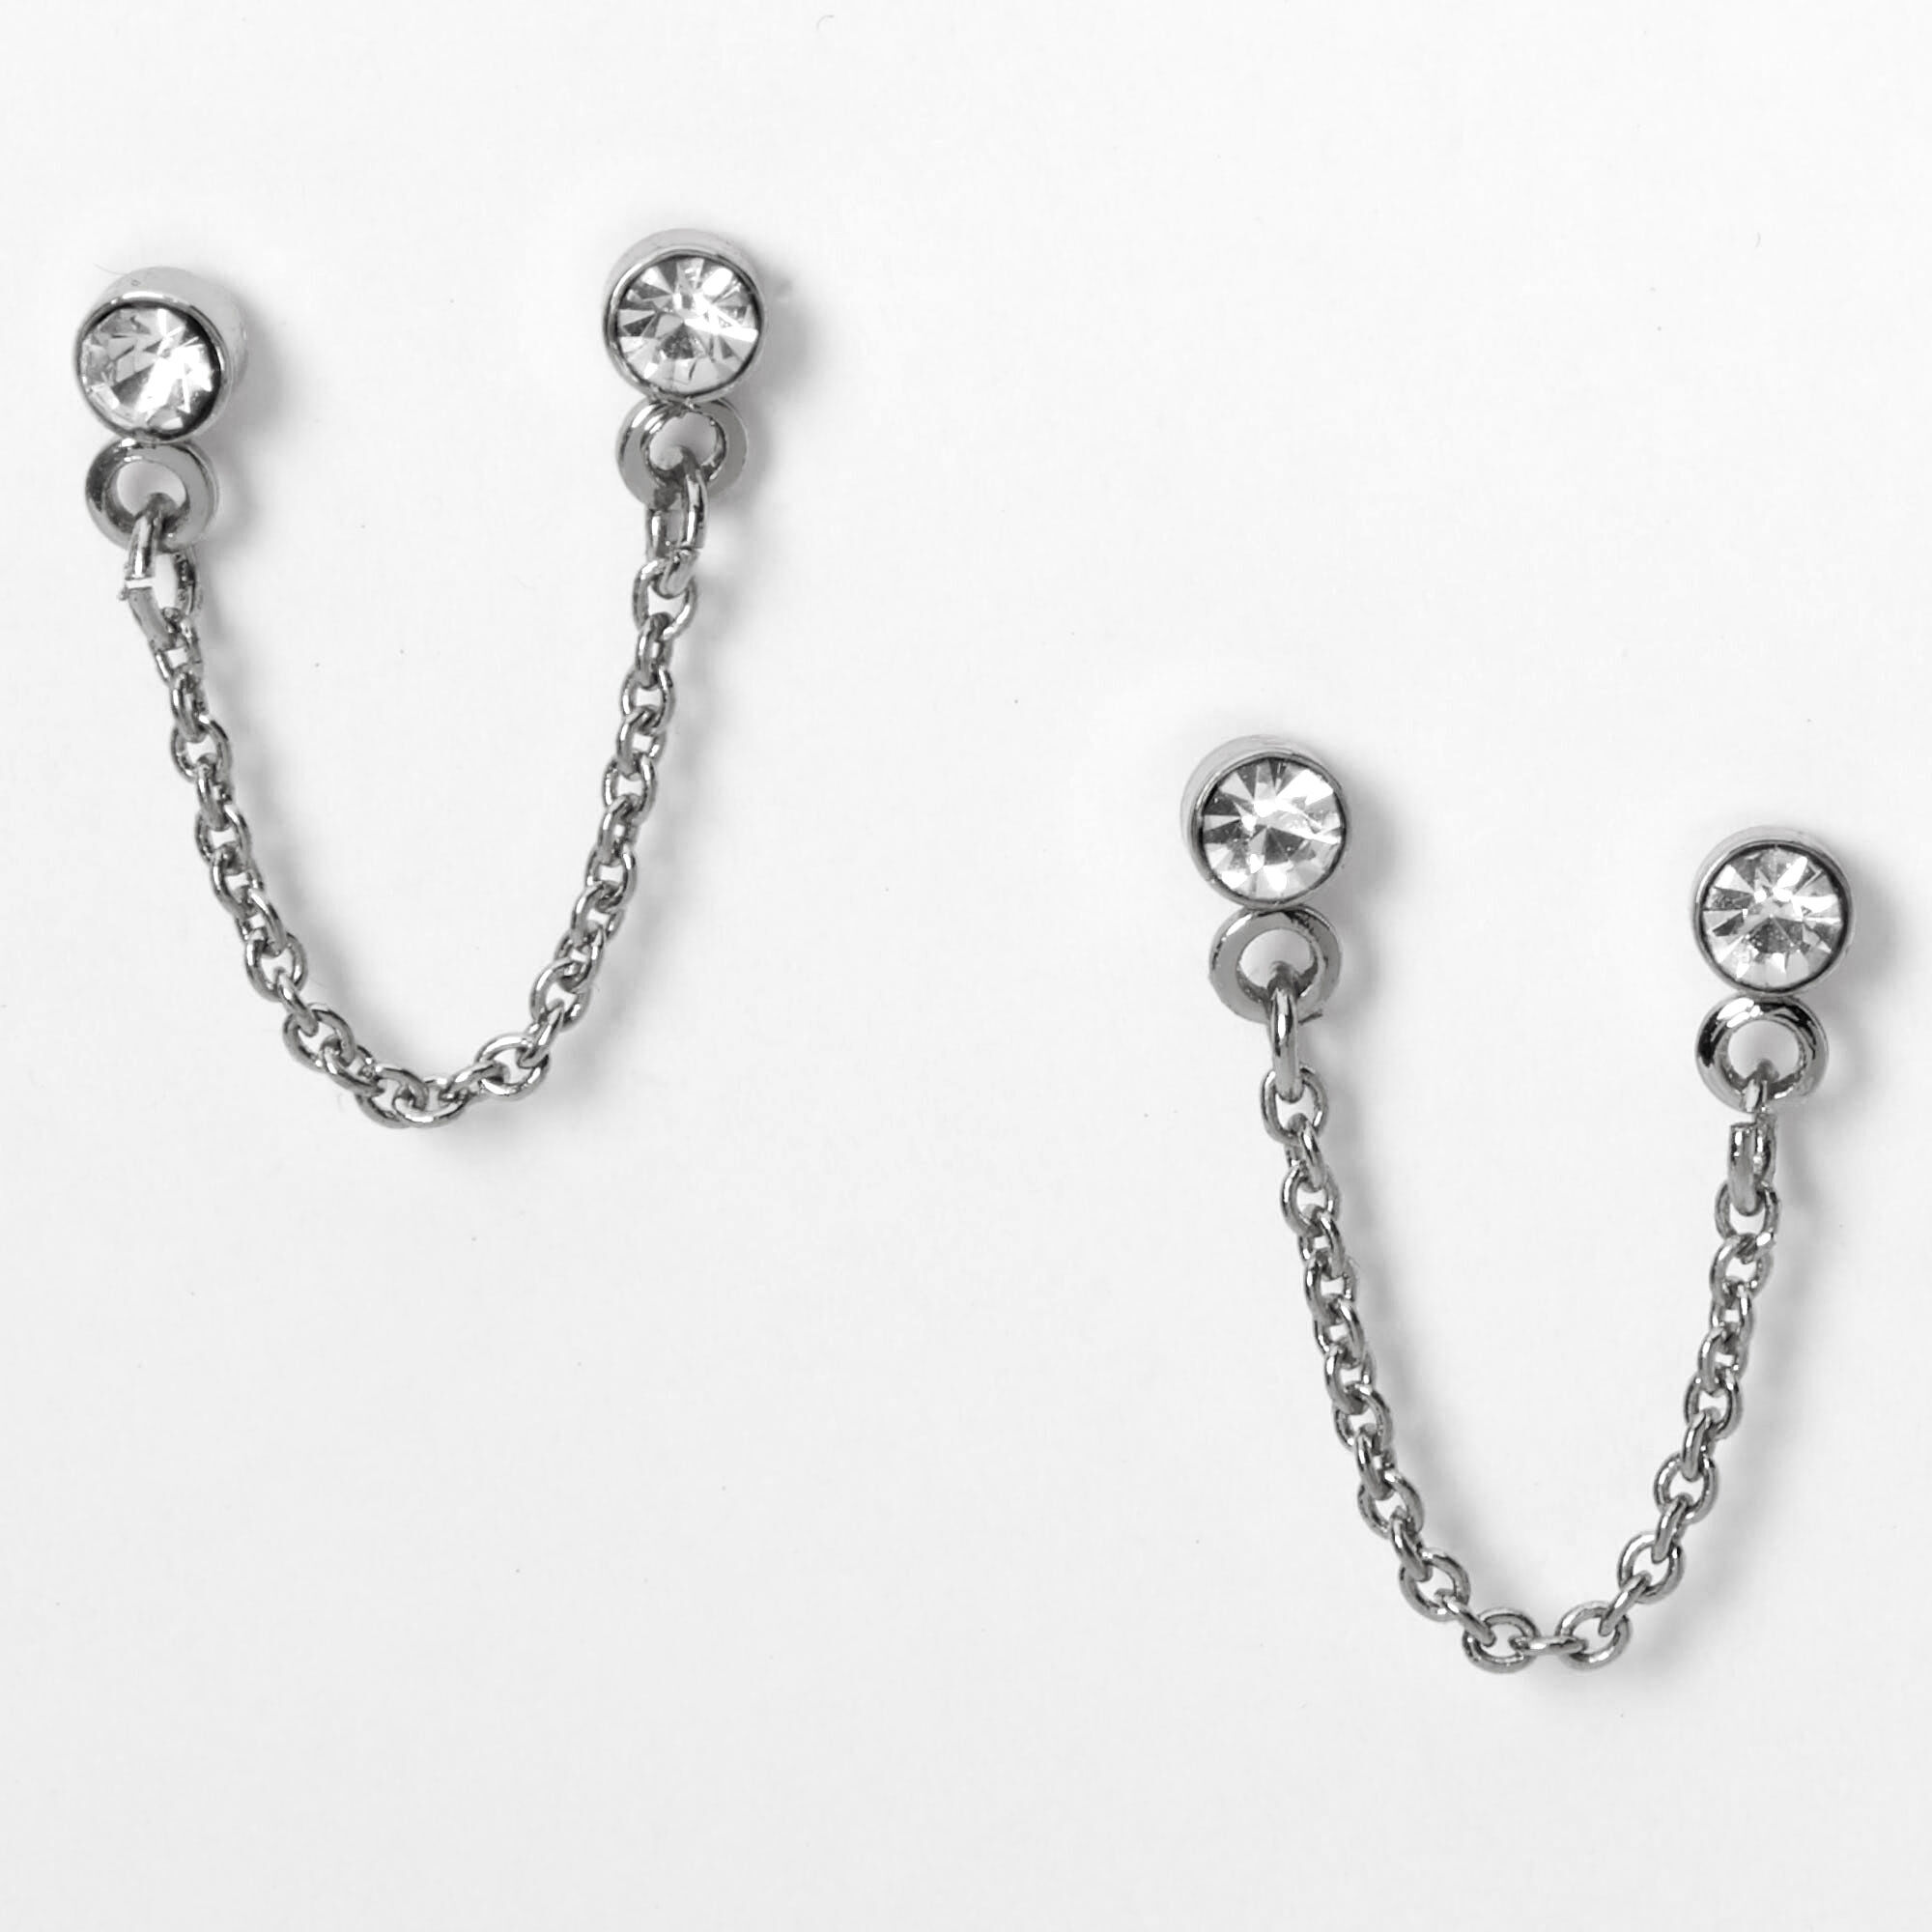 Silver Embellished Stone Connector Chain Stud Earrings